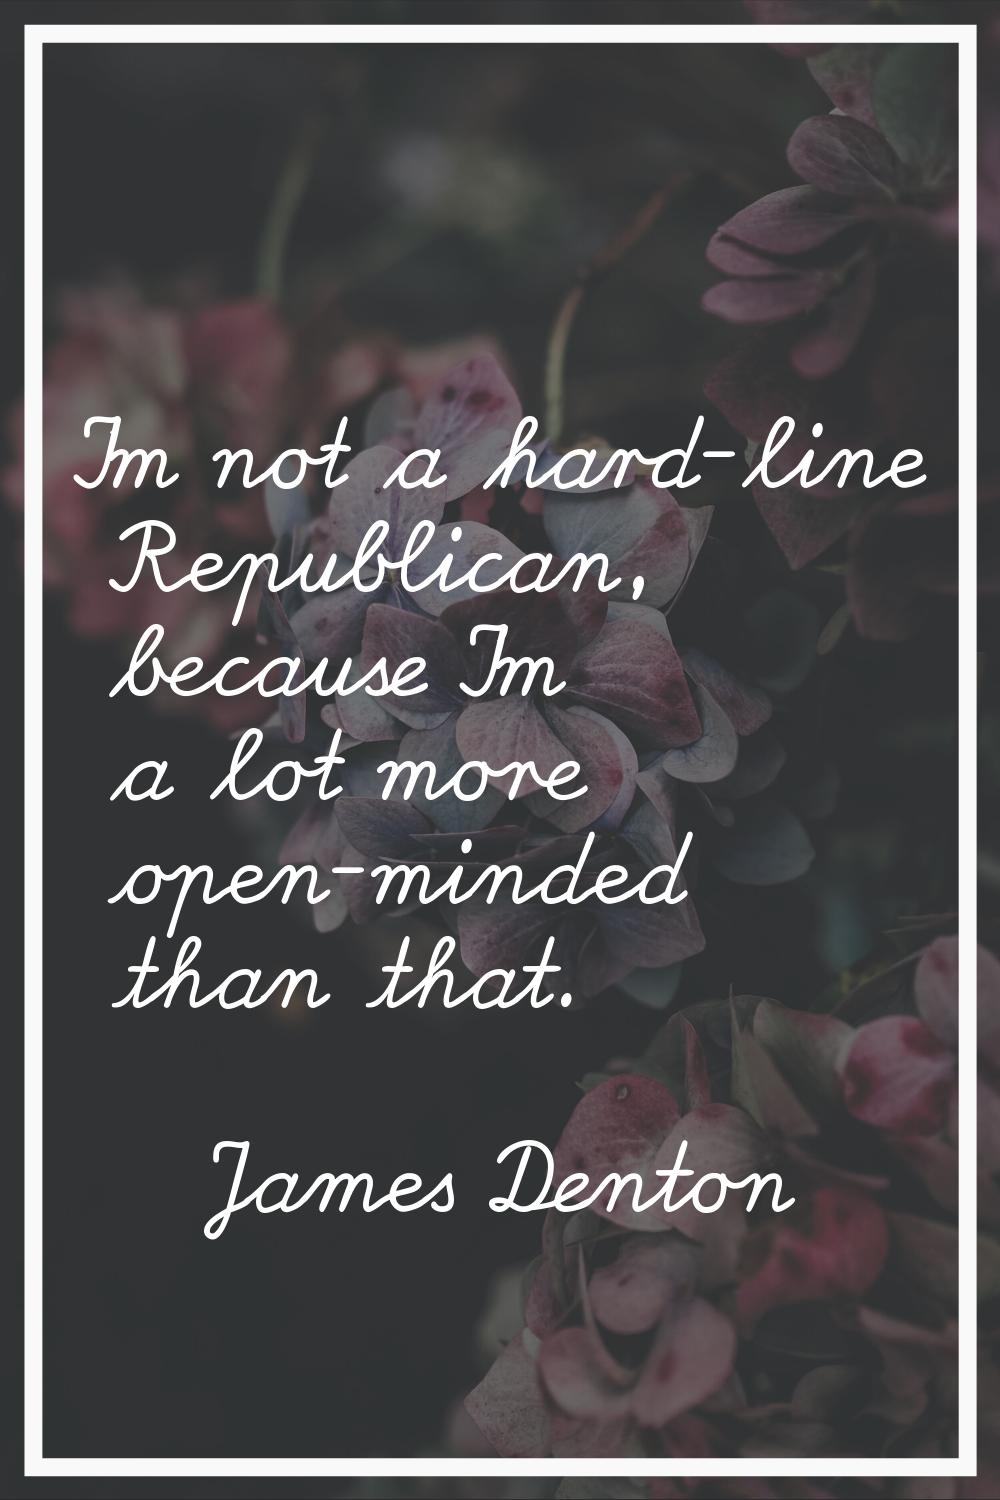 I'm not a hard-line Republican, because I'm a lot more open-minded than that.